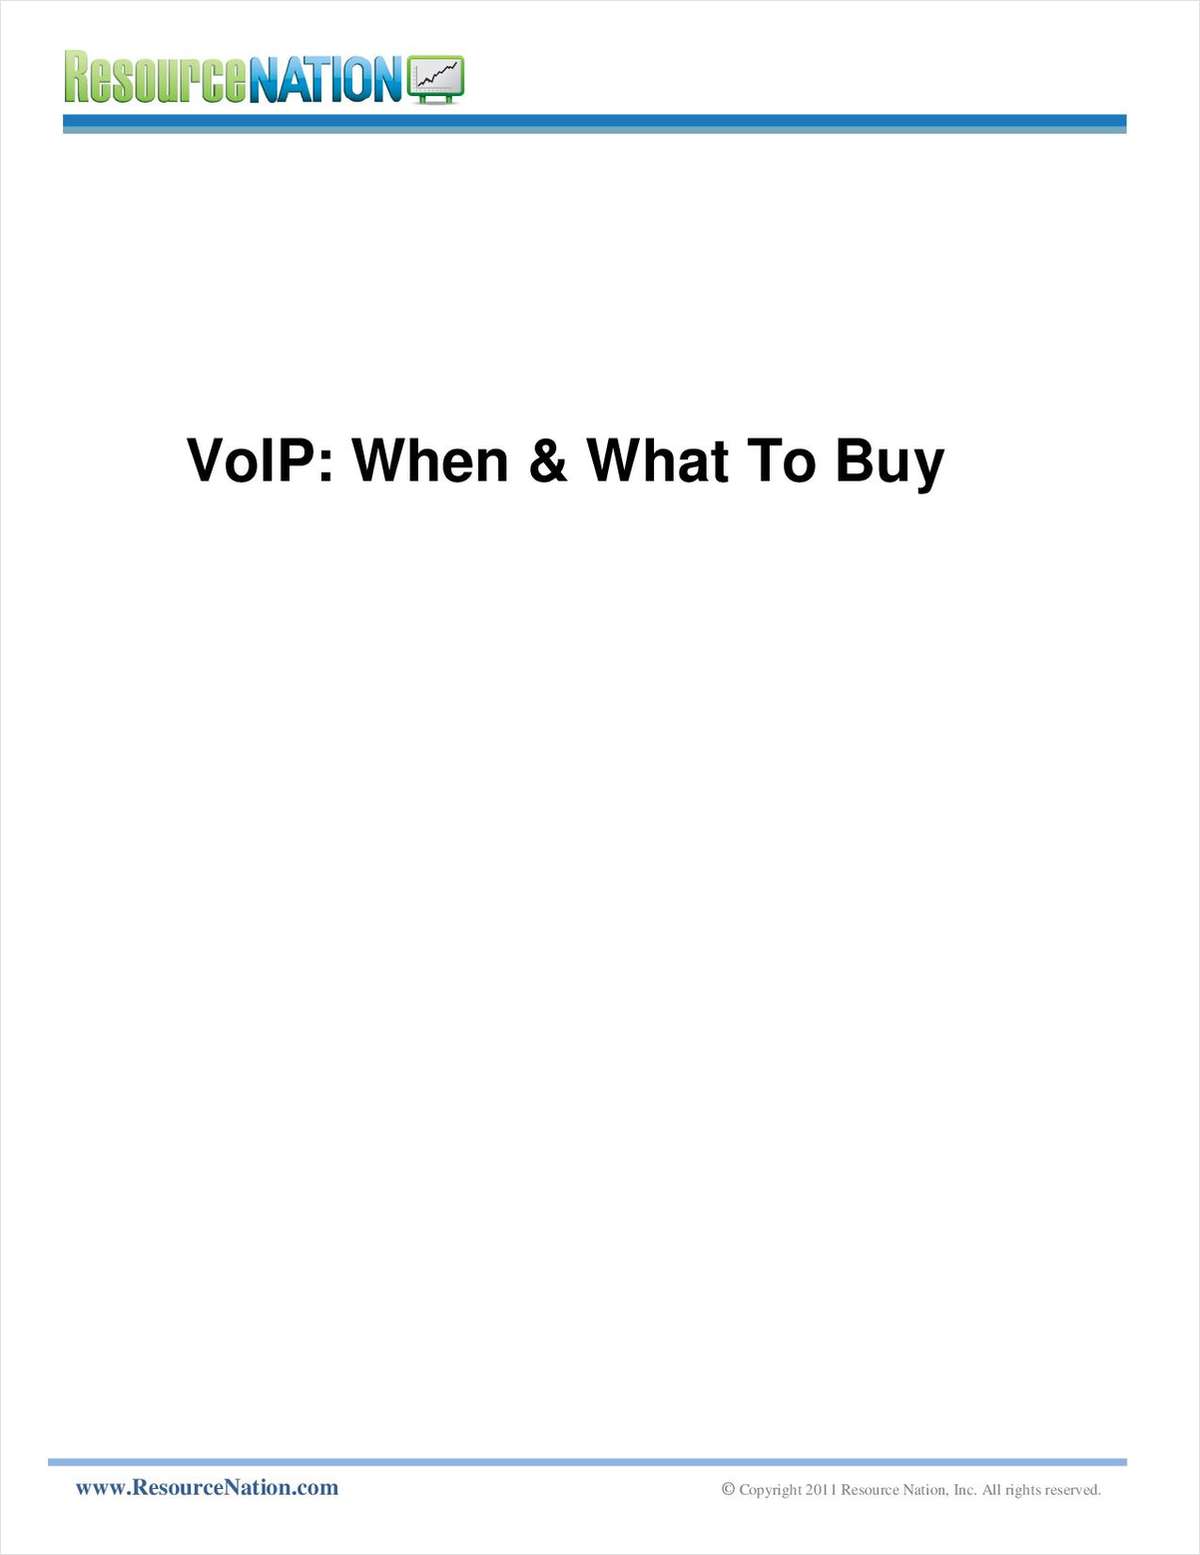 Learn If a VoIP Phone System Is Right For Your Business